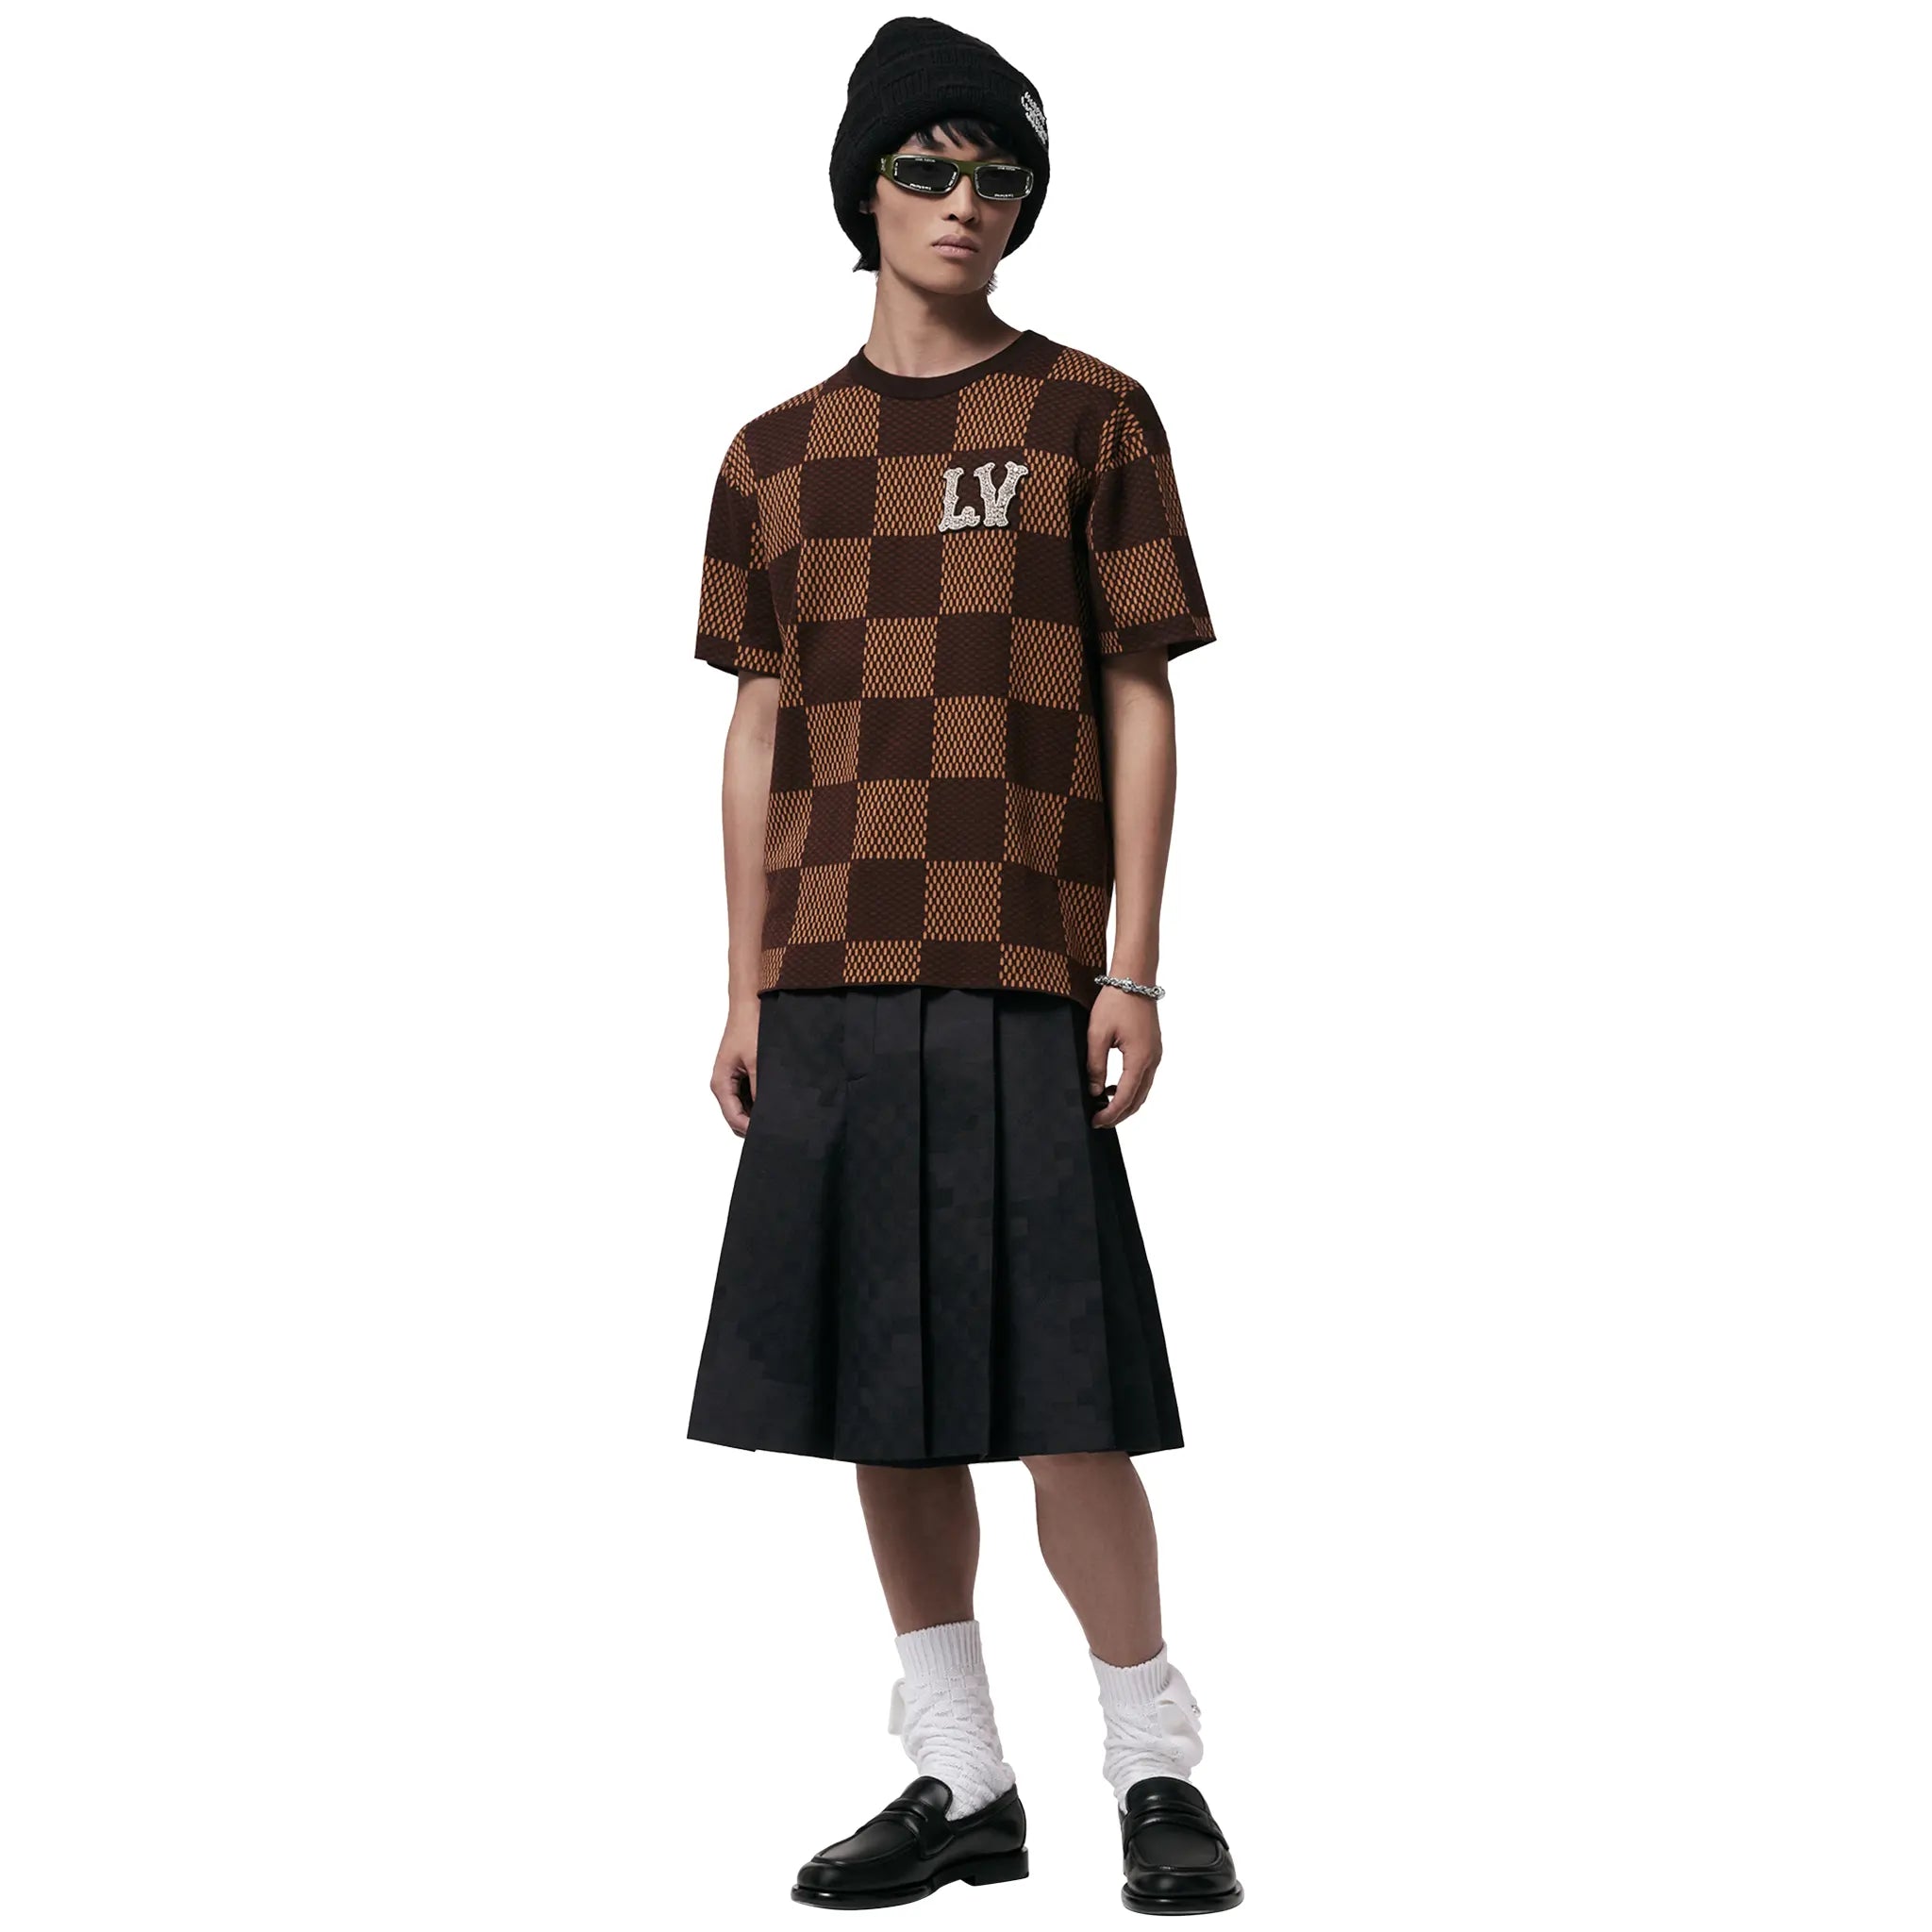 Model view of Louis Vuitton Damier LV Crystal Patch Brown T Shirt NVPROD4940223V